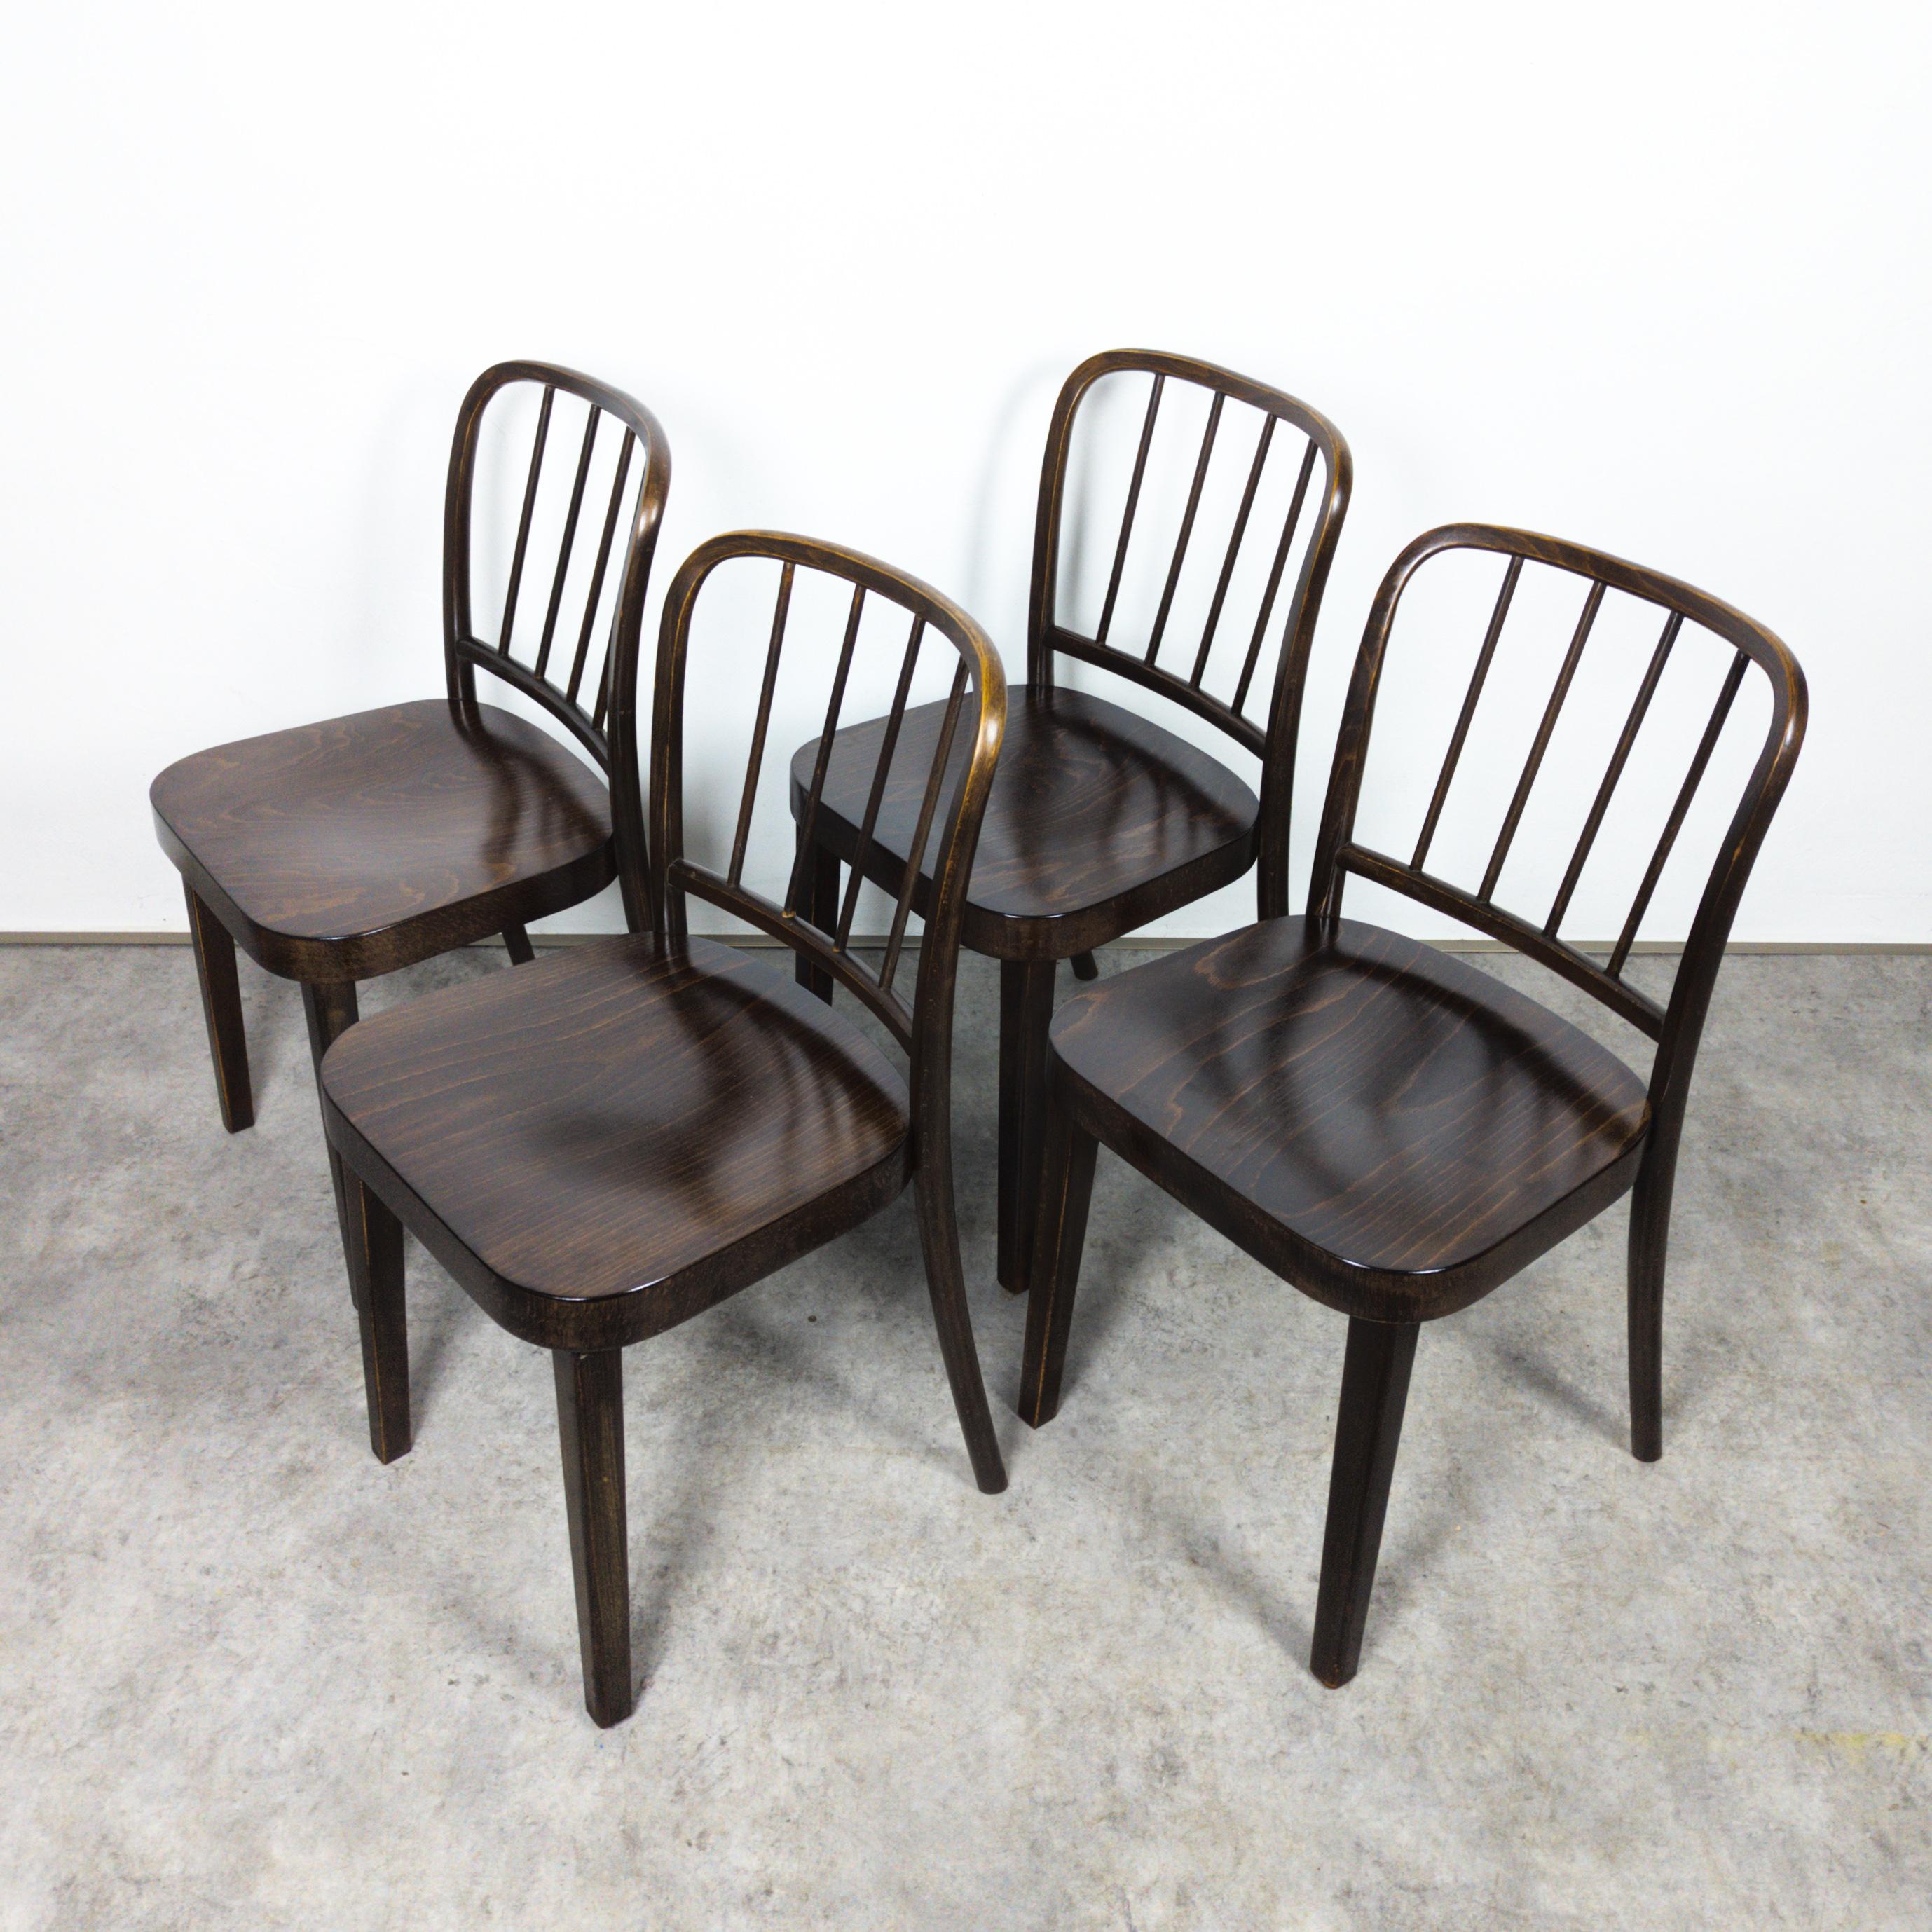 Rare set of four Thonet A 811/4 chairs by Josef Hoffmann For Sale 5